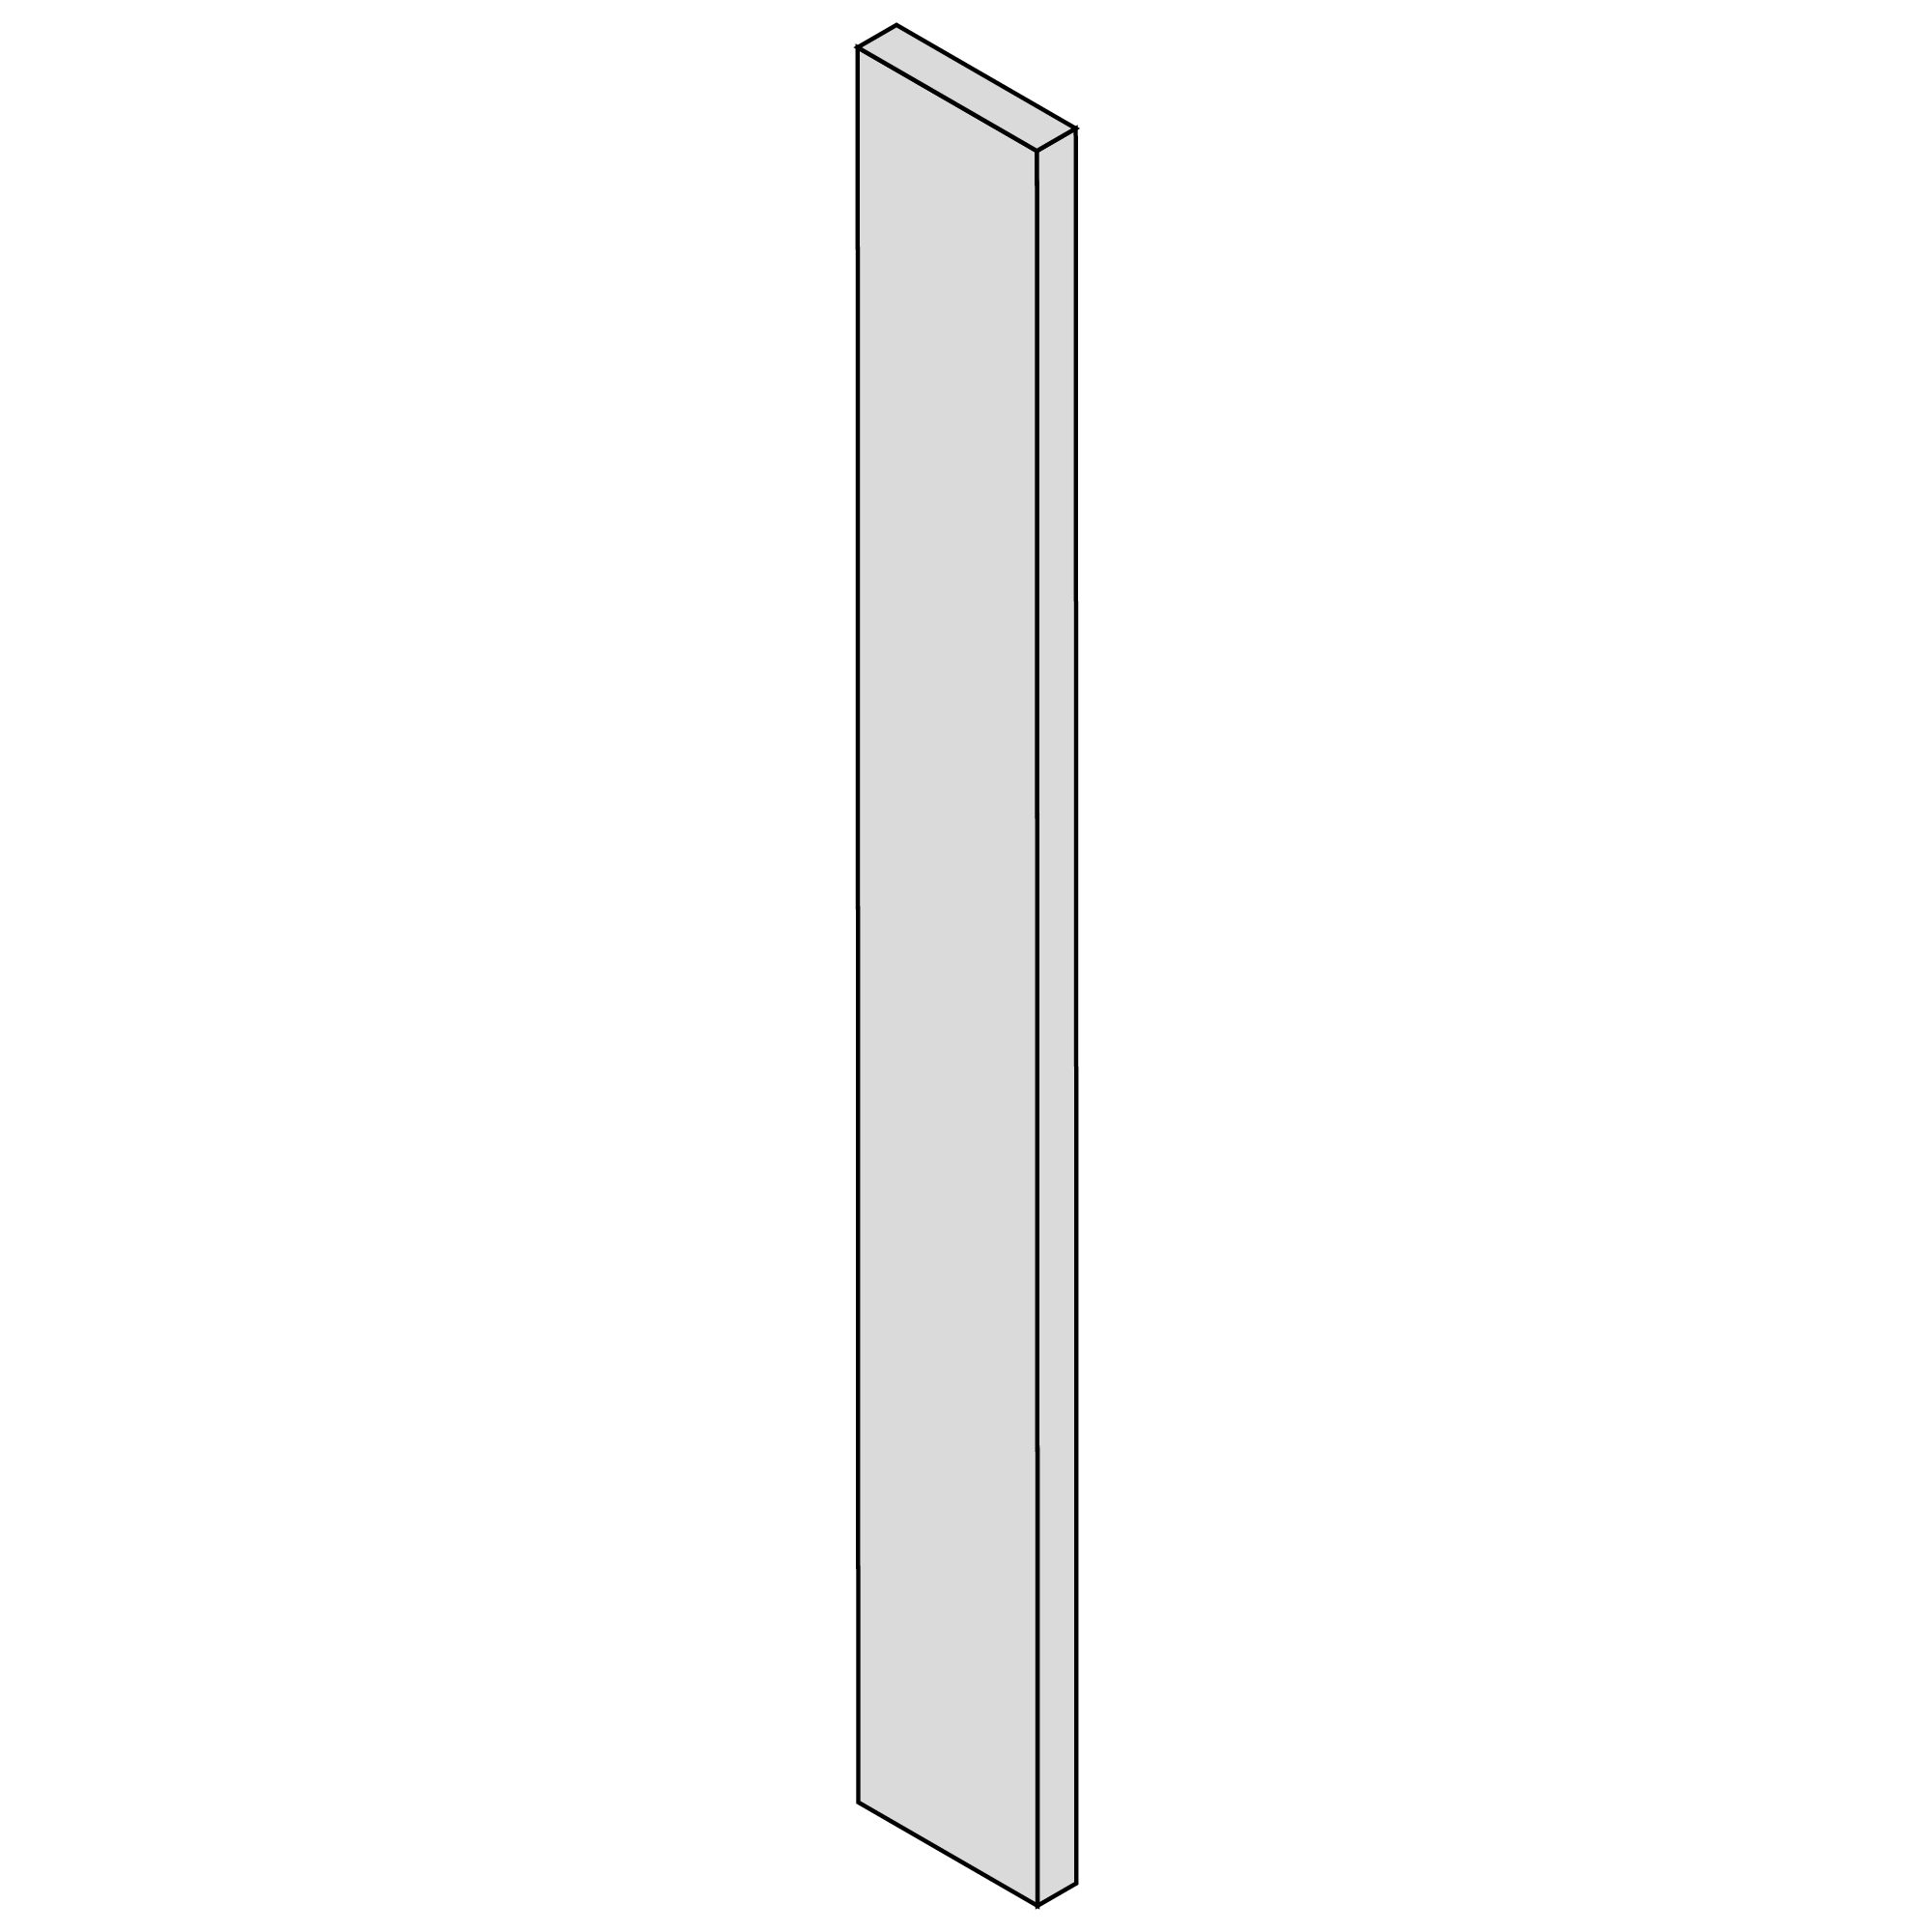 Diagram of an infill for cabinetry